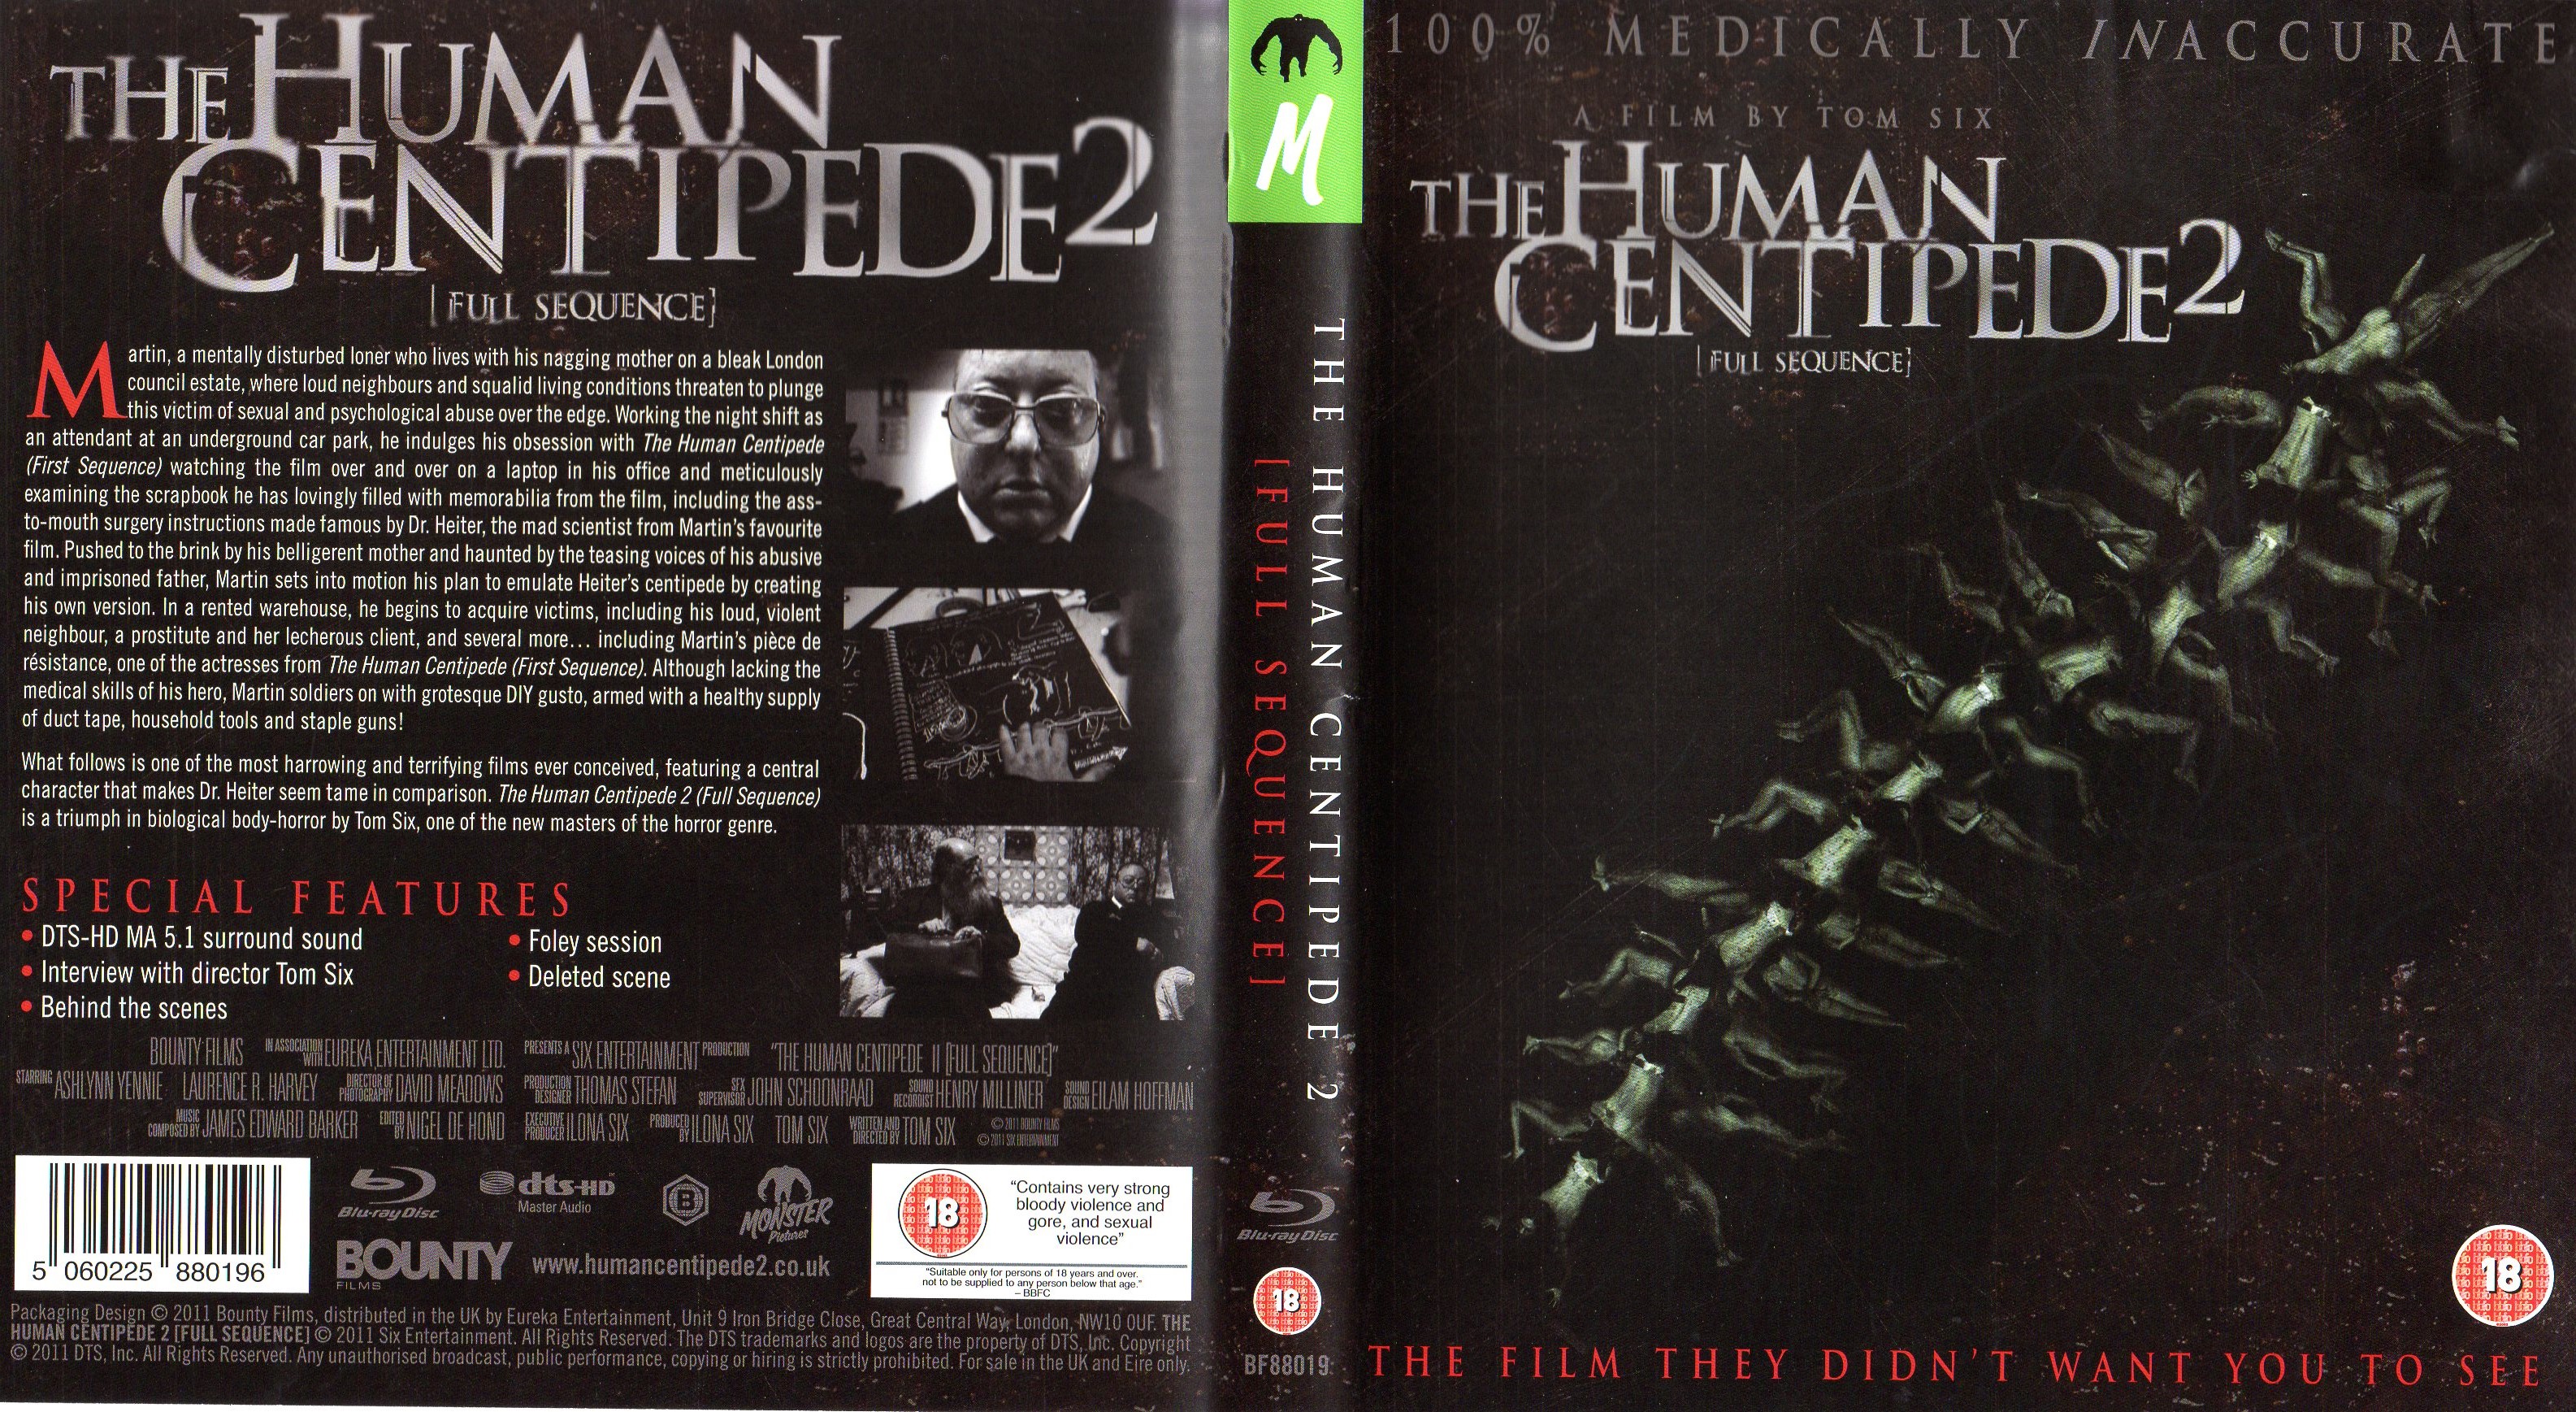 Jaquette DVD The Human Centipede 2 (BLU-RAY)